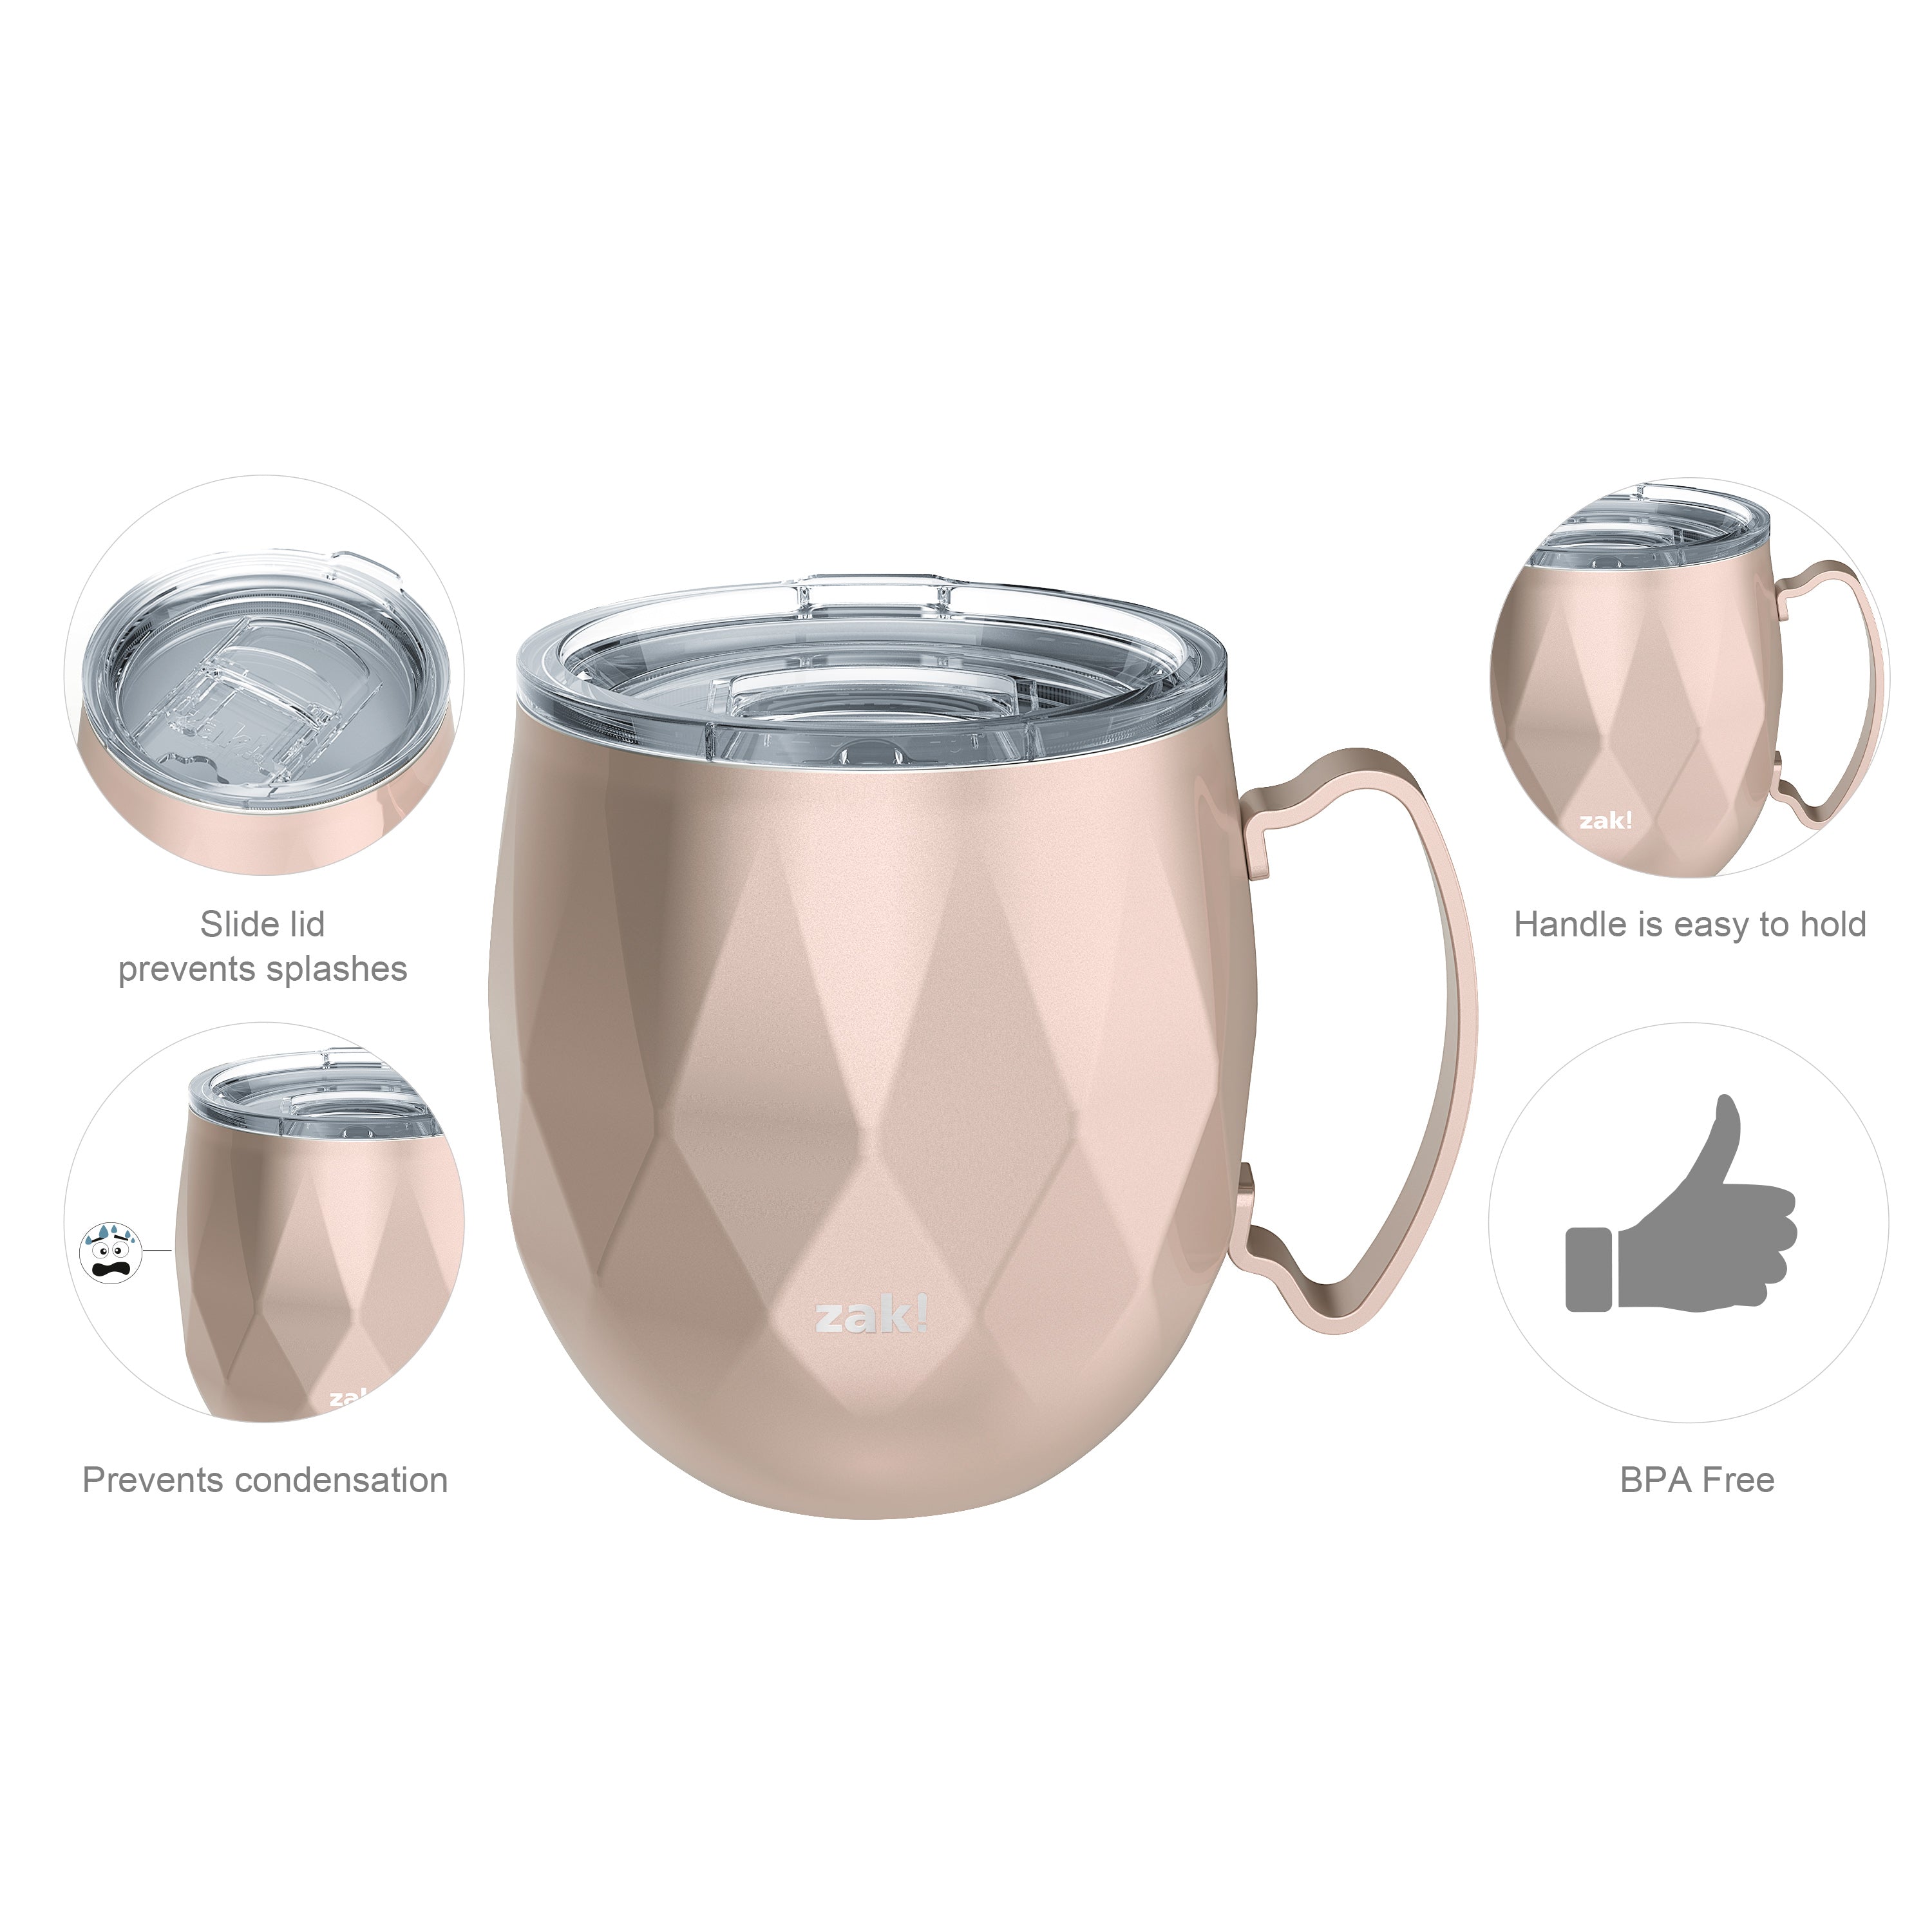 Fractal Vacuum Insulated Stainless Steel Moscow Mule Mug with Lid, Rose Gold